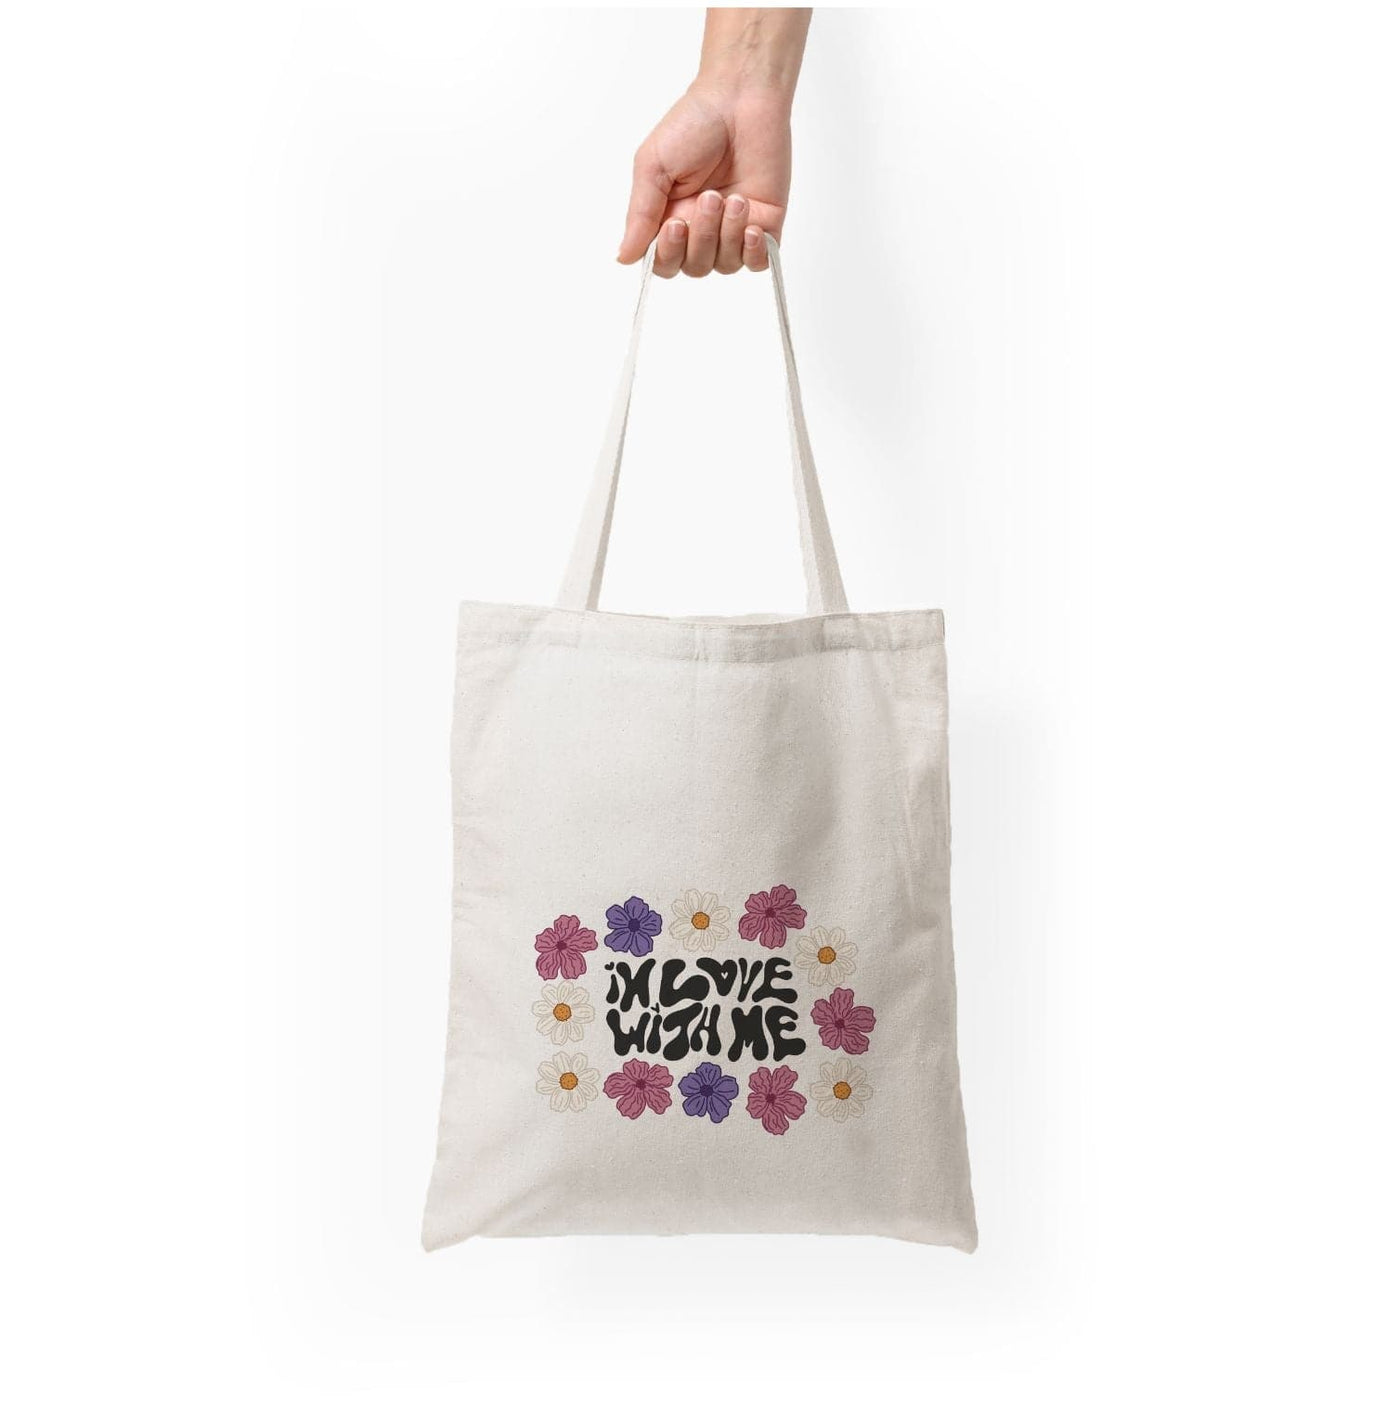 In Love With Me - Valentine's Day Tote Bag